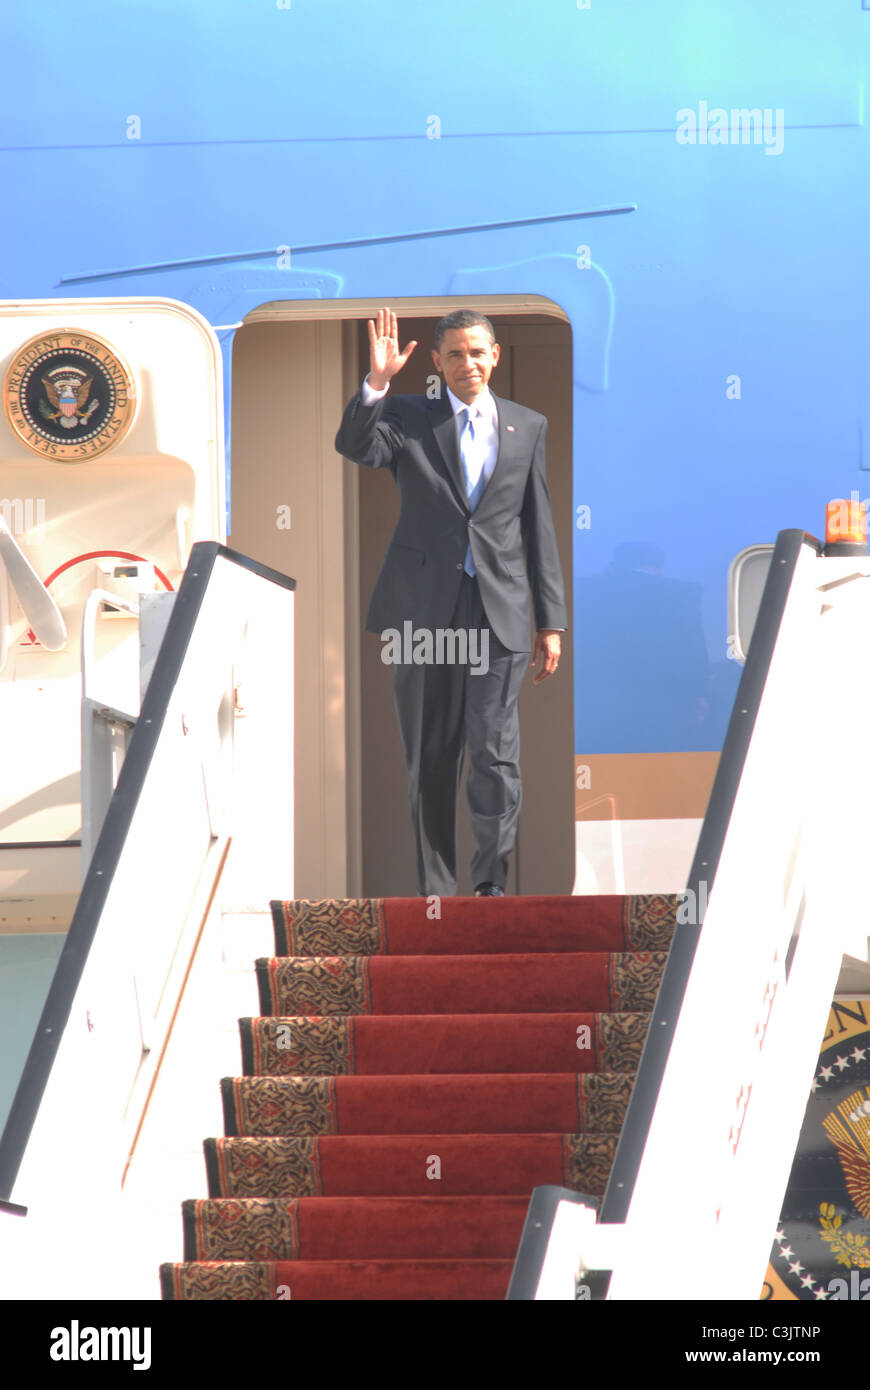 US President Barack Obama arrives in Cairo to make a major policy speech to the Islamic World at Cairo University. Stock Photo